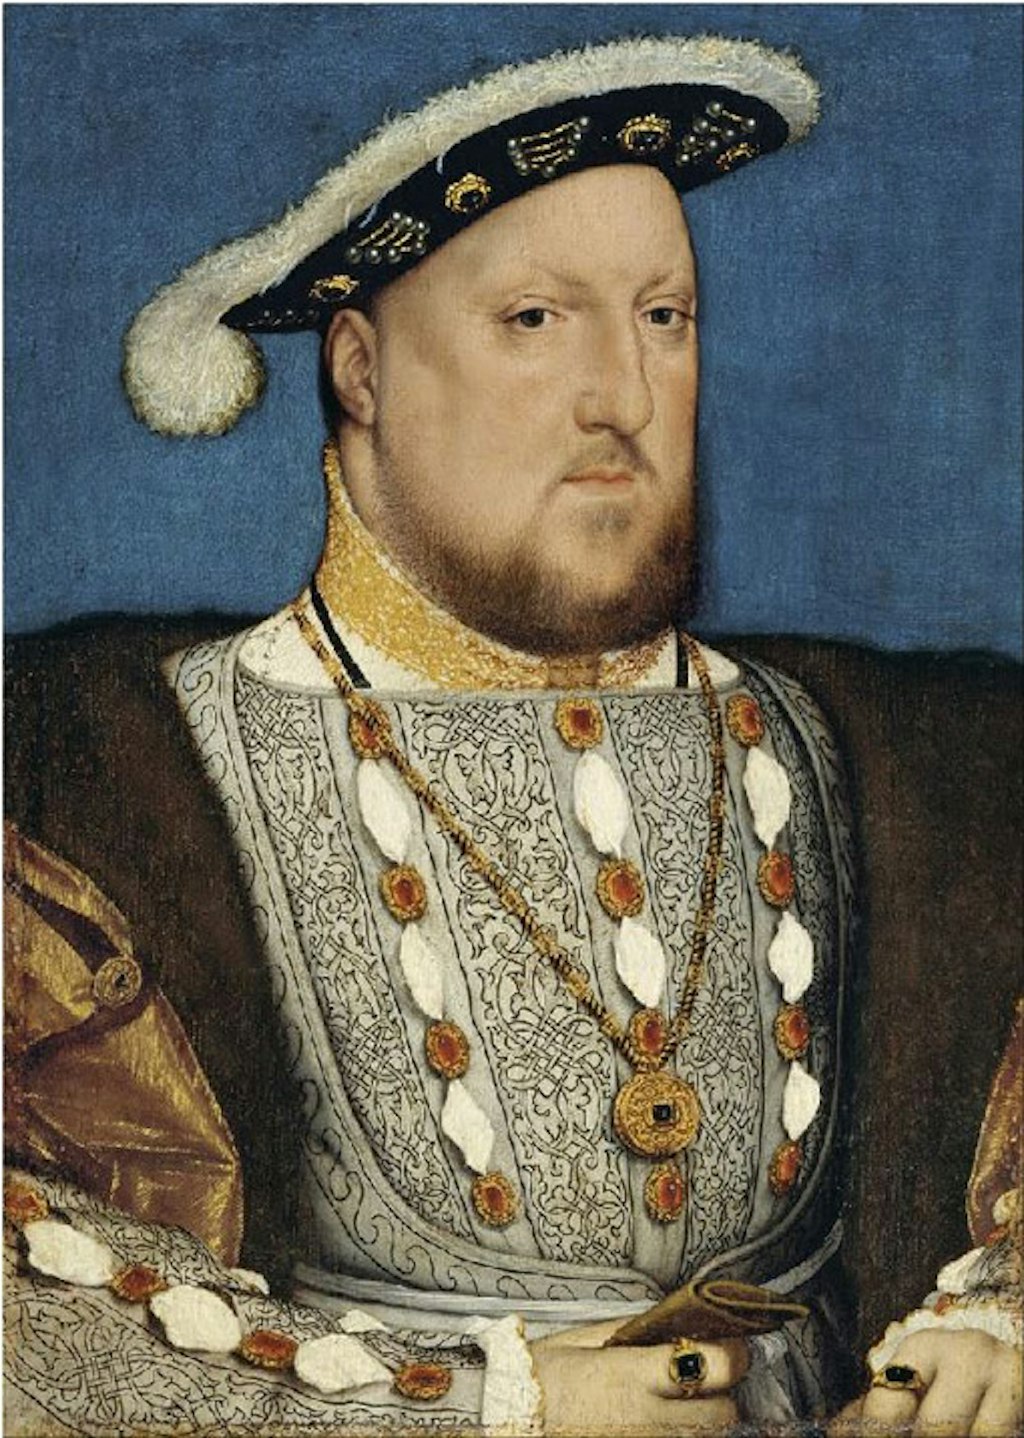 The head and torso of a bearded man wearing a hat and clothes, both trimmed with fur, and a ring on each hand.